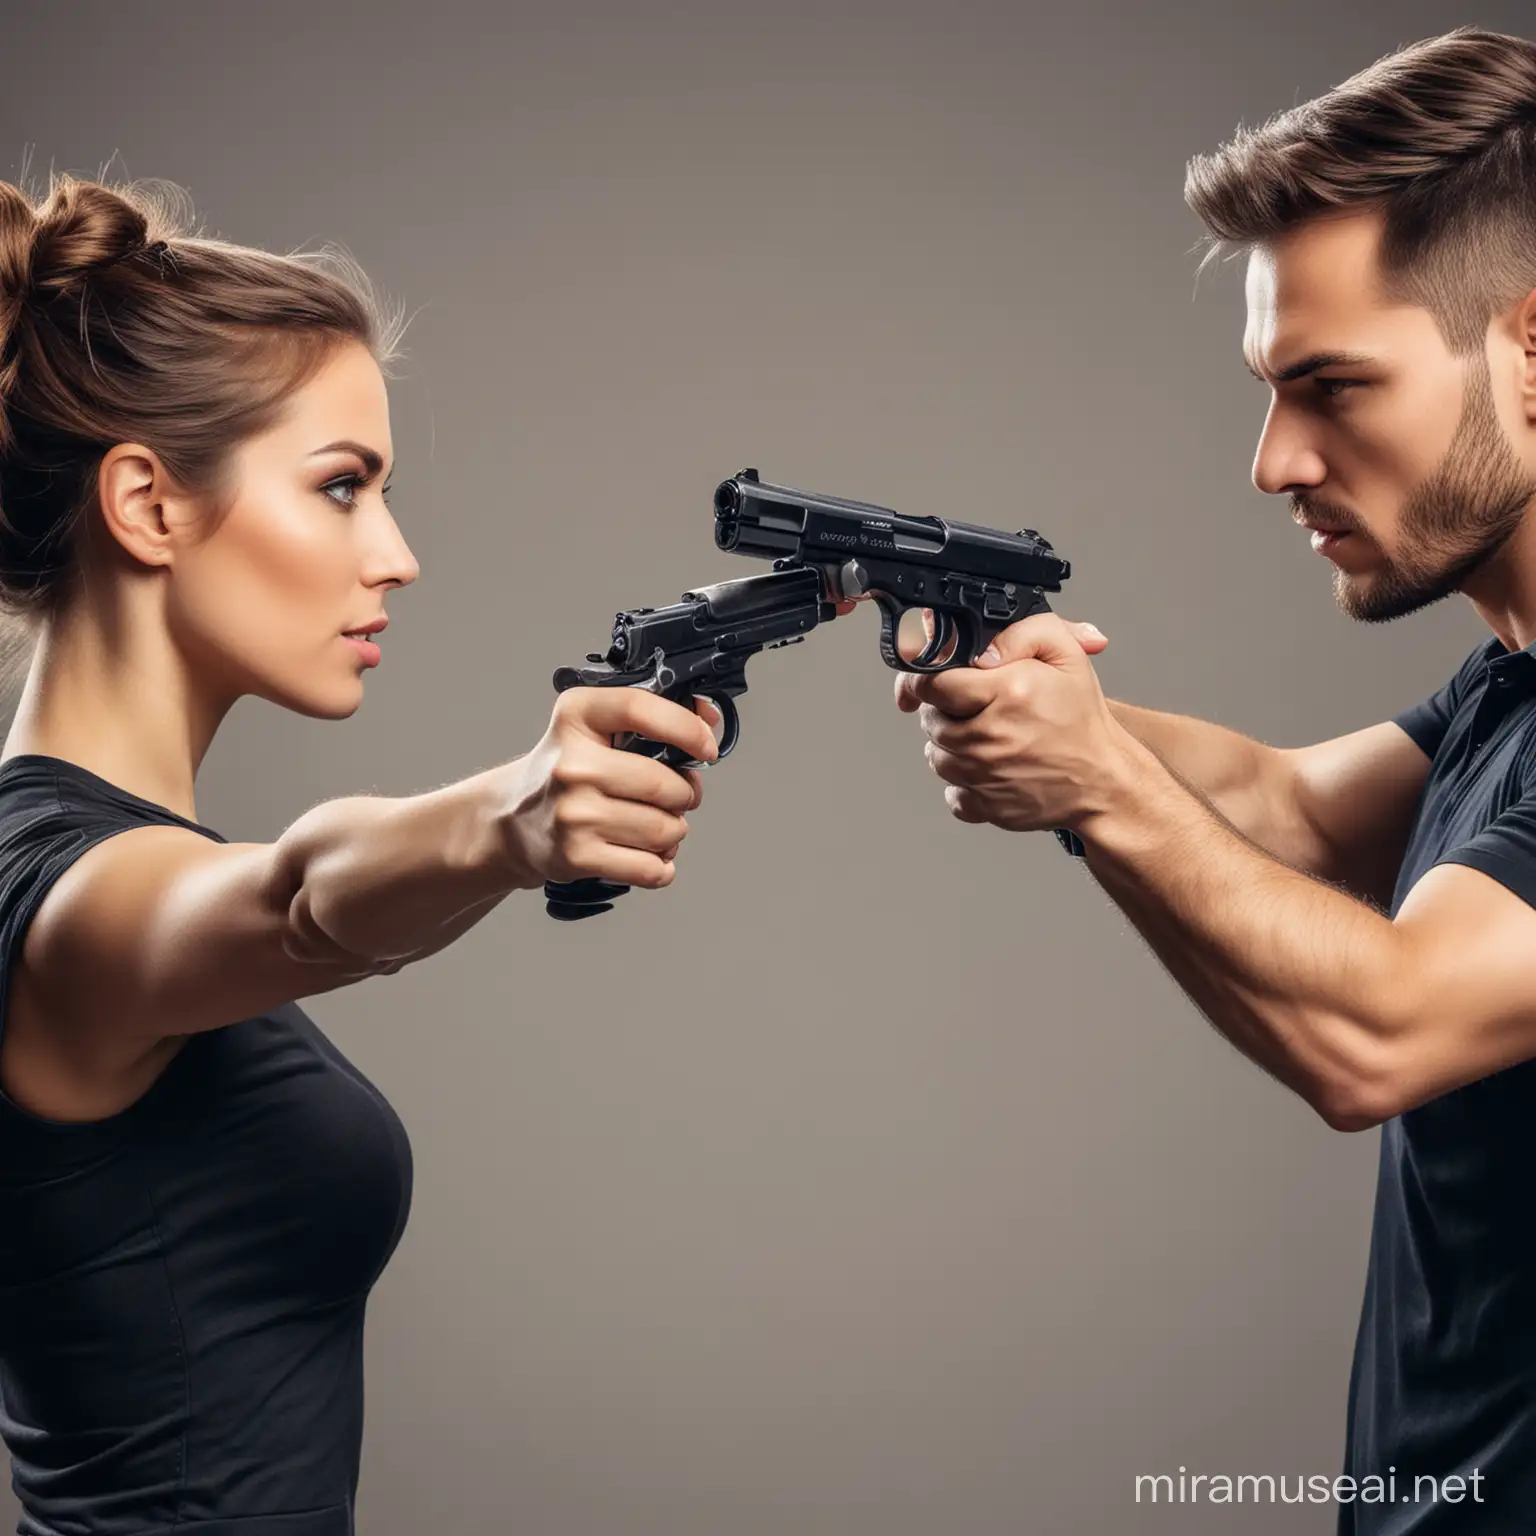 beautiful woman and man mutually aiming at each other with guns.